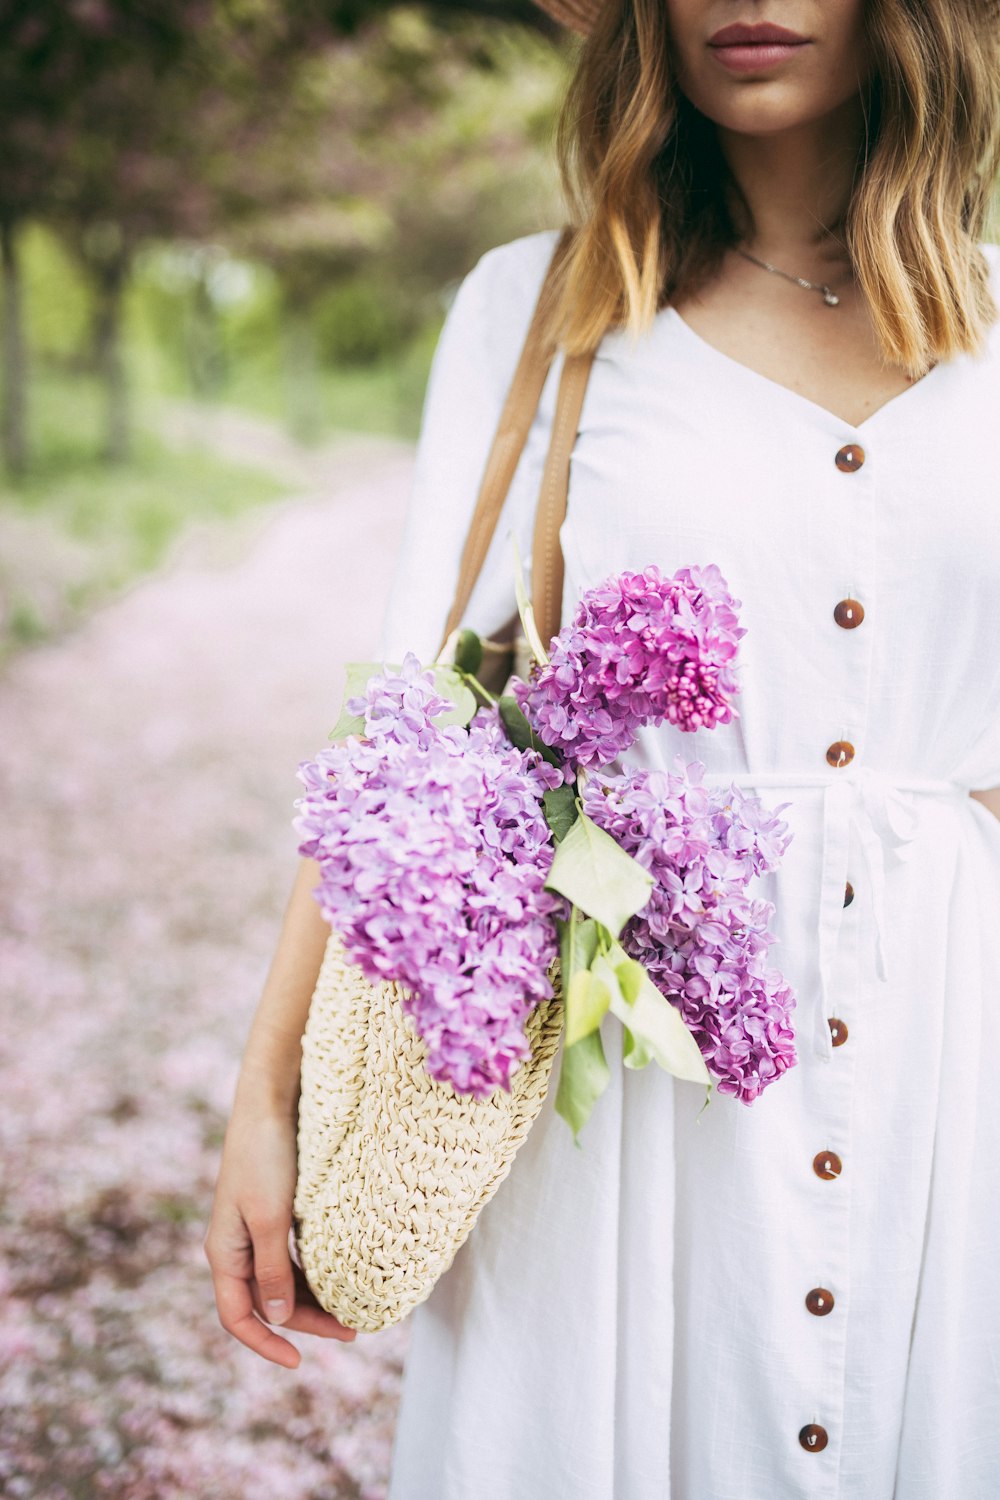 woman carrying bag with flowers